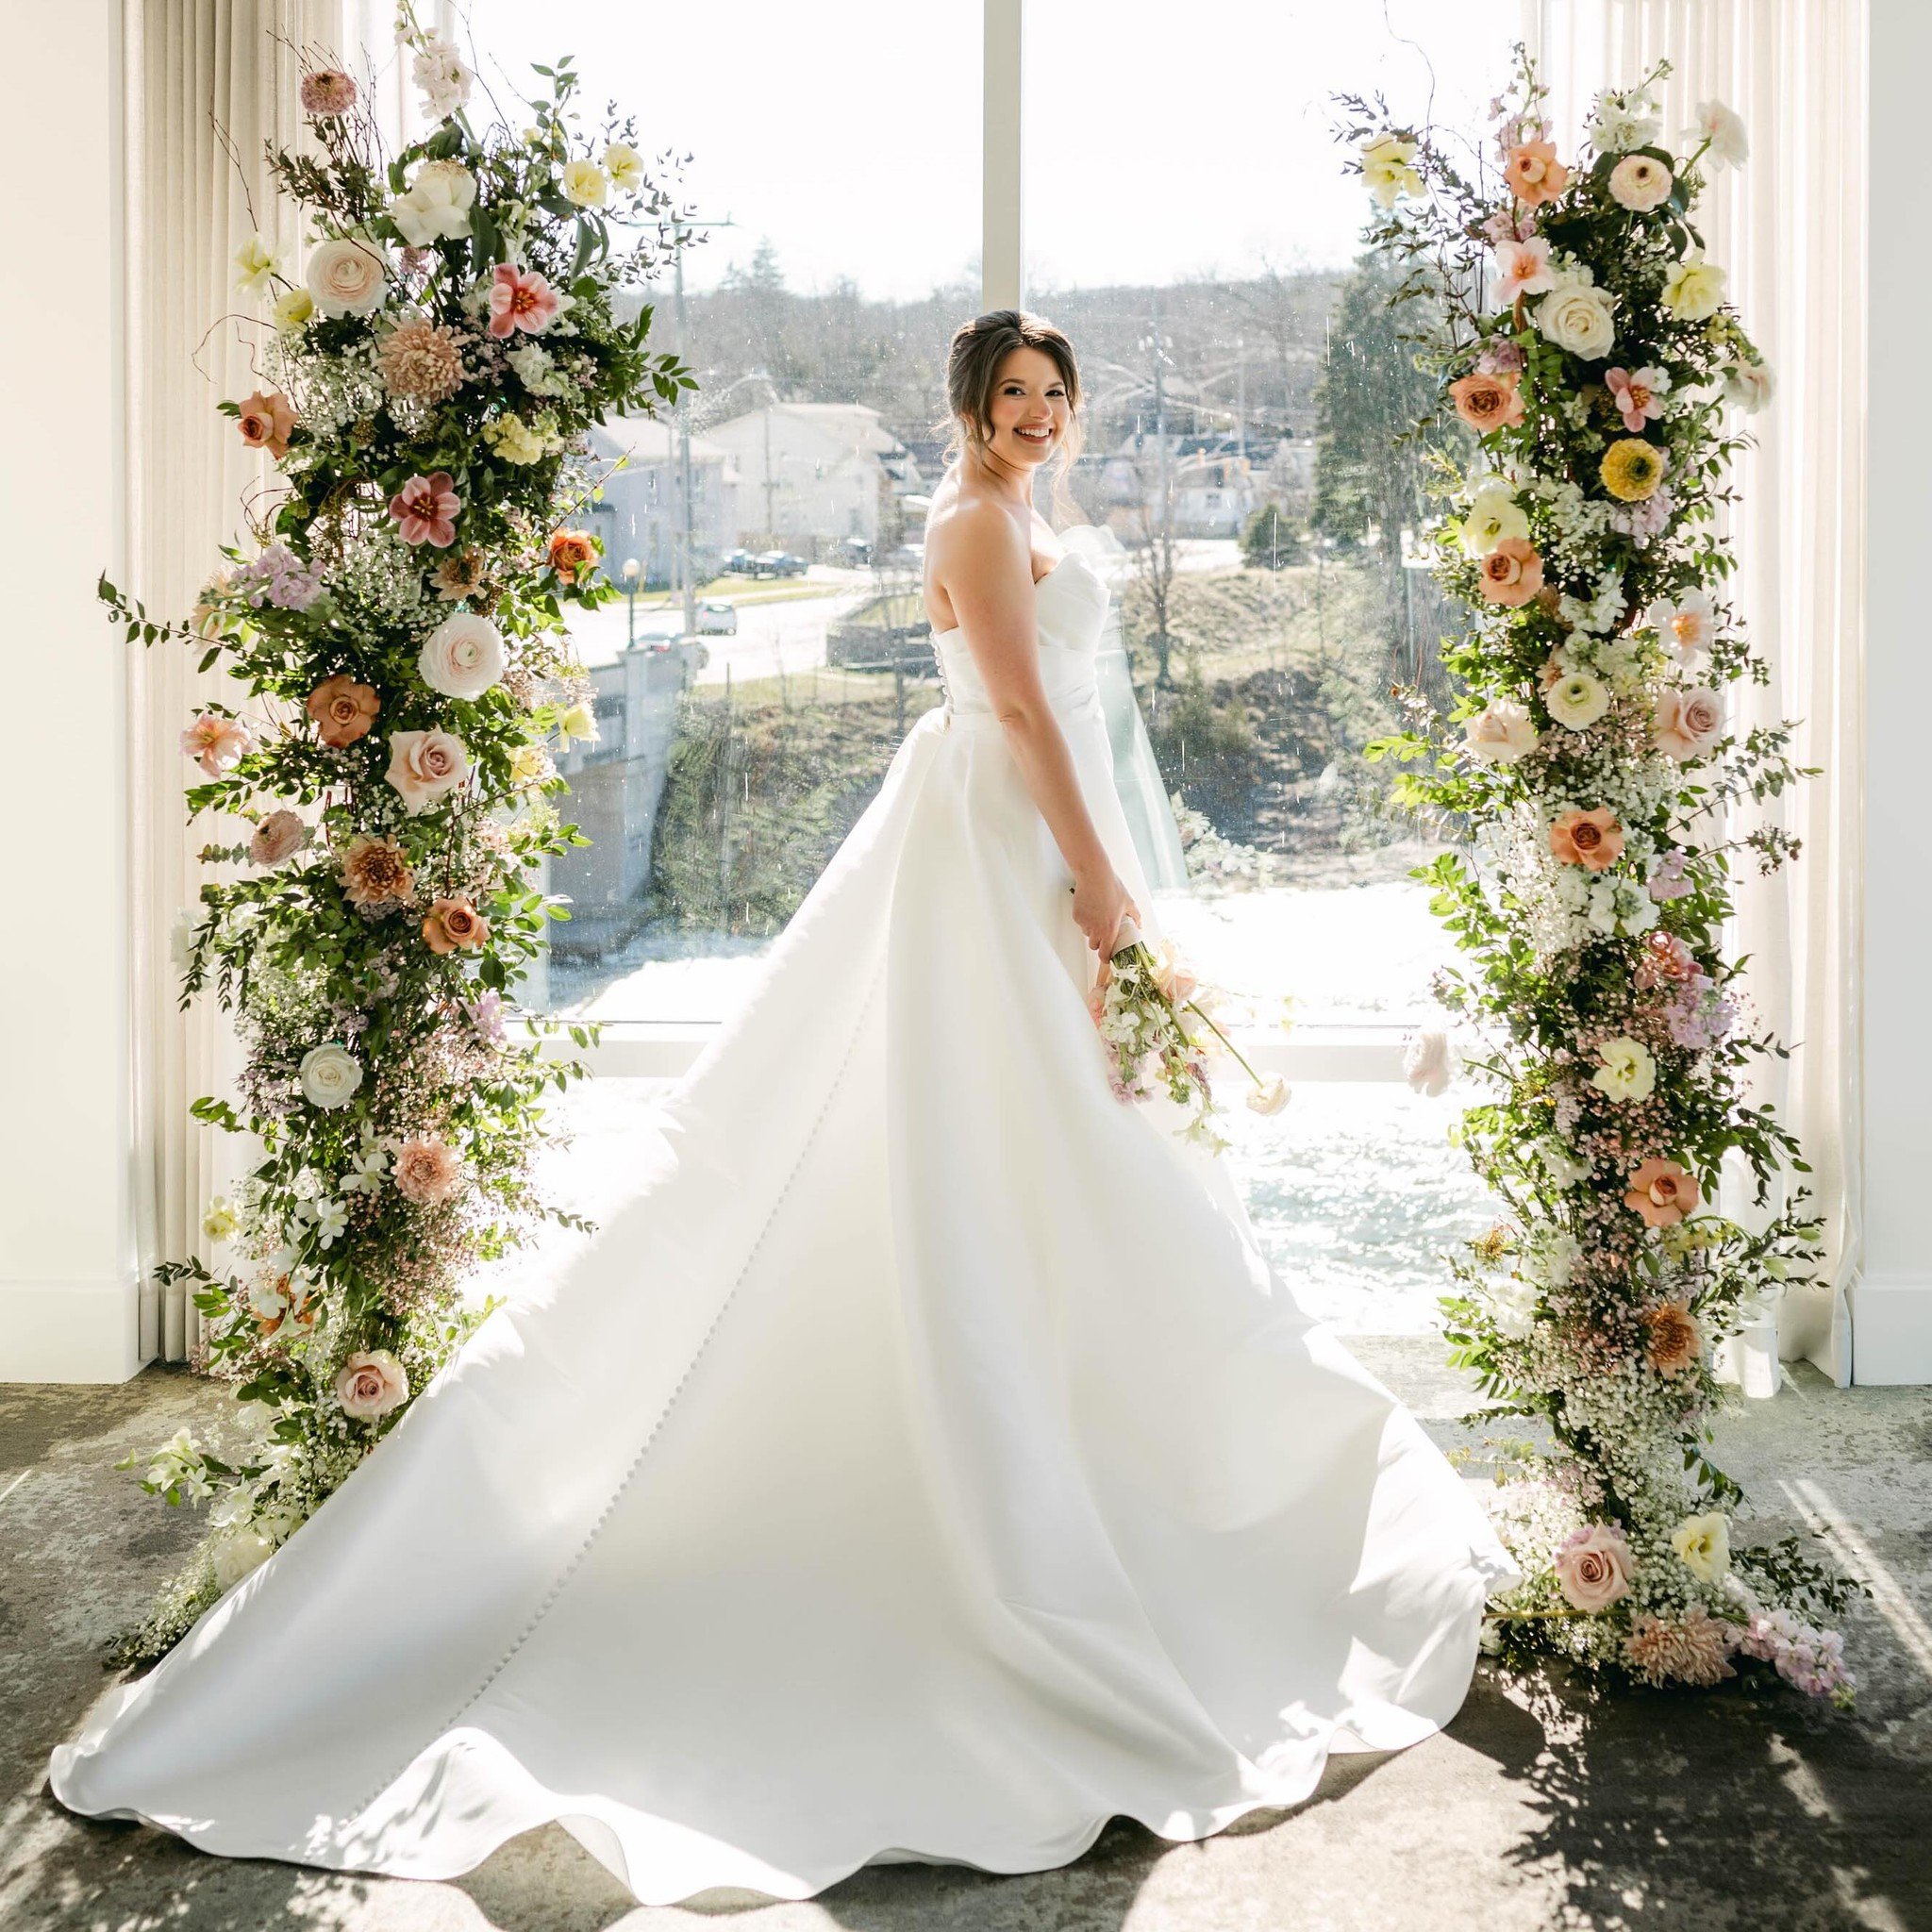 Ok guys, seriously &hellip;.can we have a moment for Shelby? I mean 🥹😍🤯

When creating these floral pillars I imagined how the light would be once she seems them, once they are saying their vows, during the kiss. 

@515photoco&mdash; ladies, your 